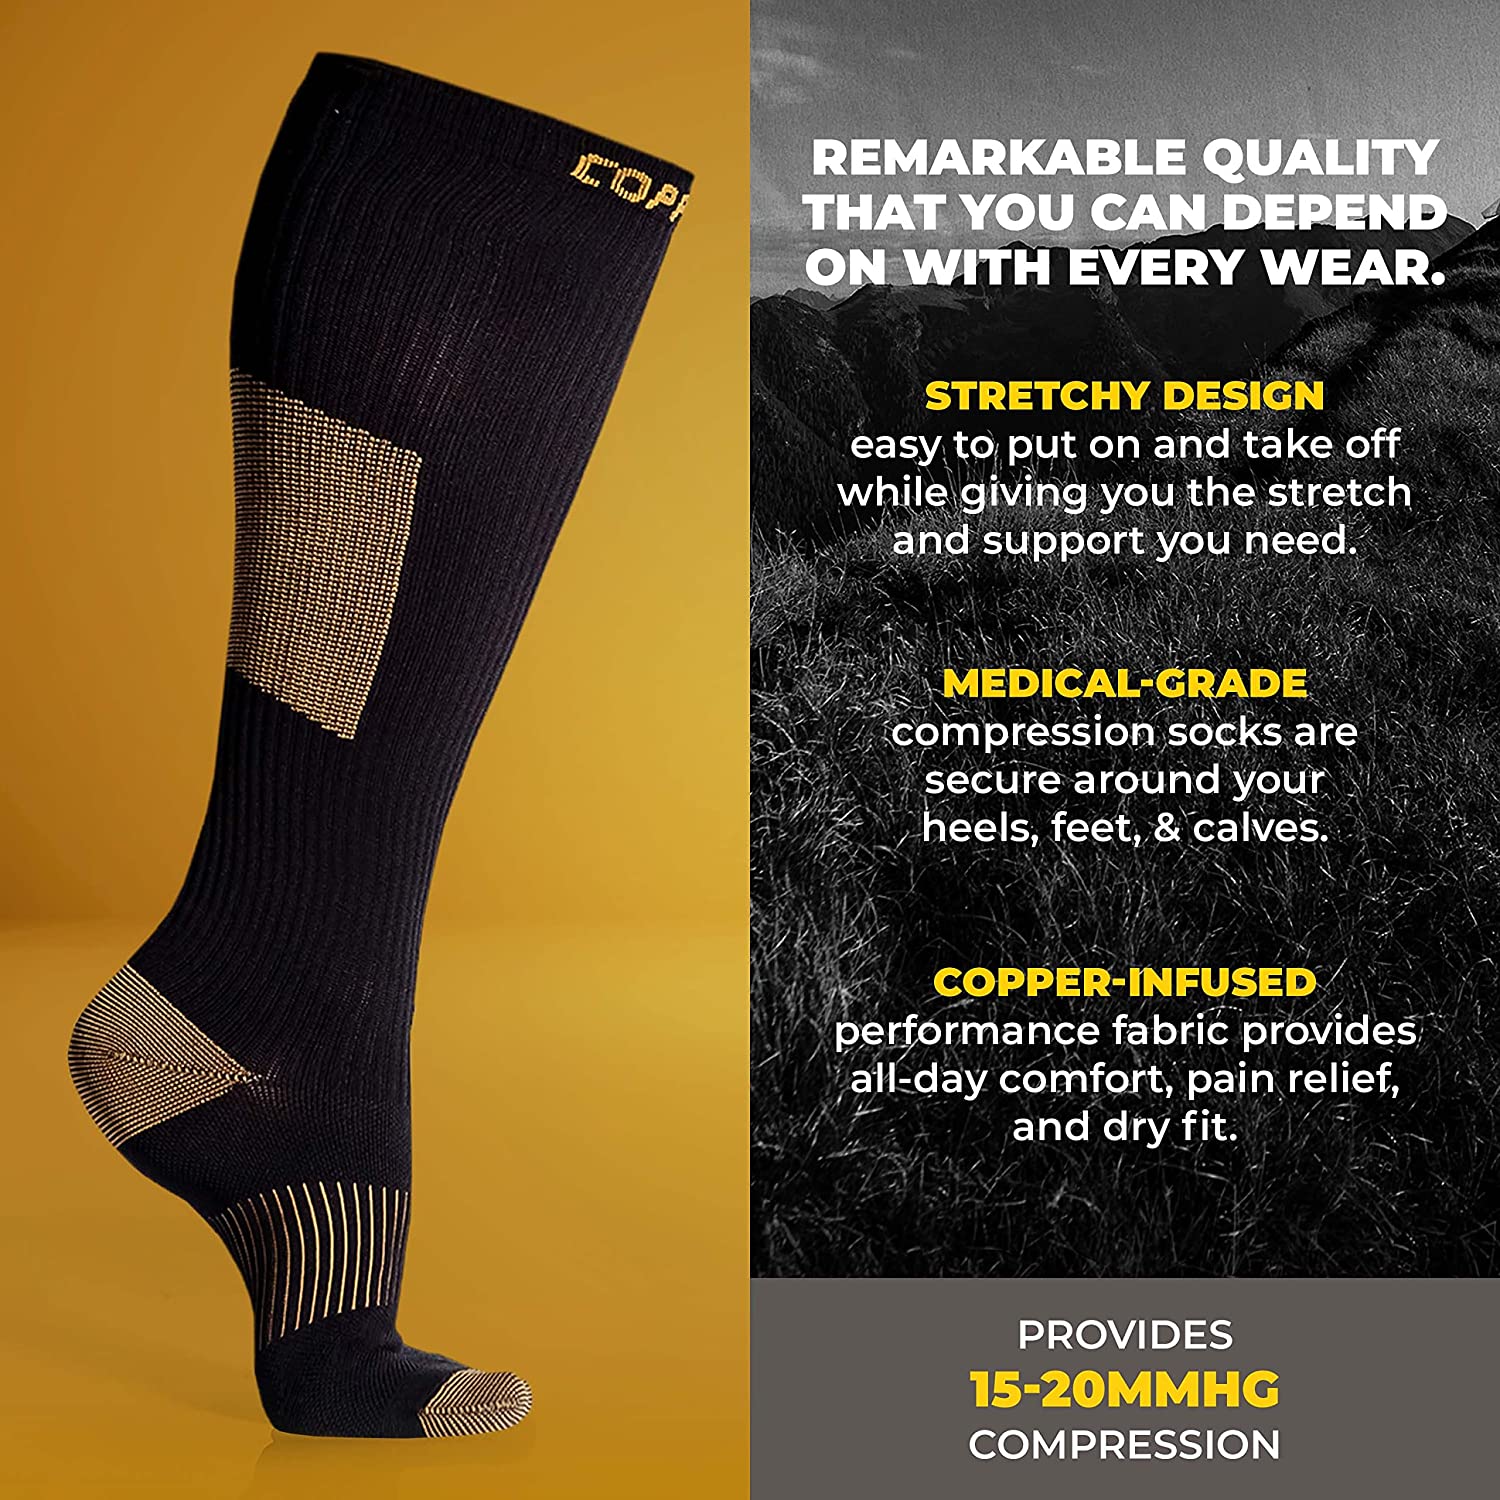 New Diabetic Socks for Men Received Well by Amazon Customers